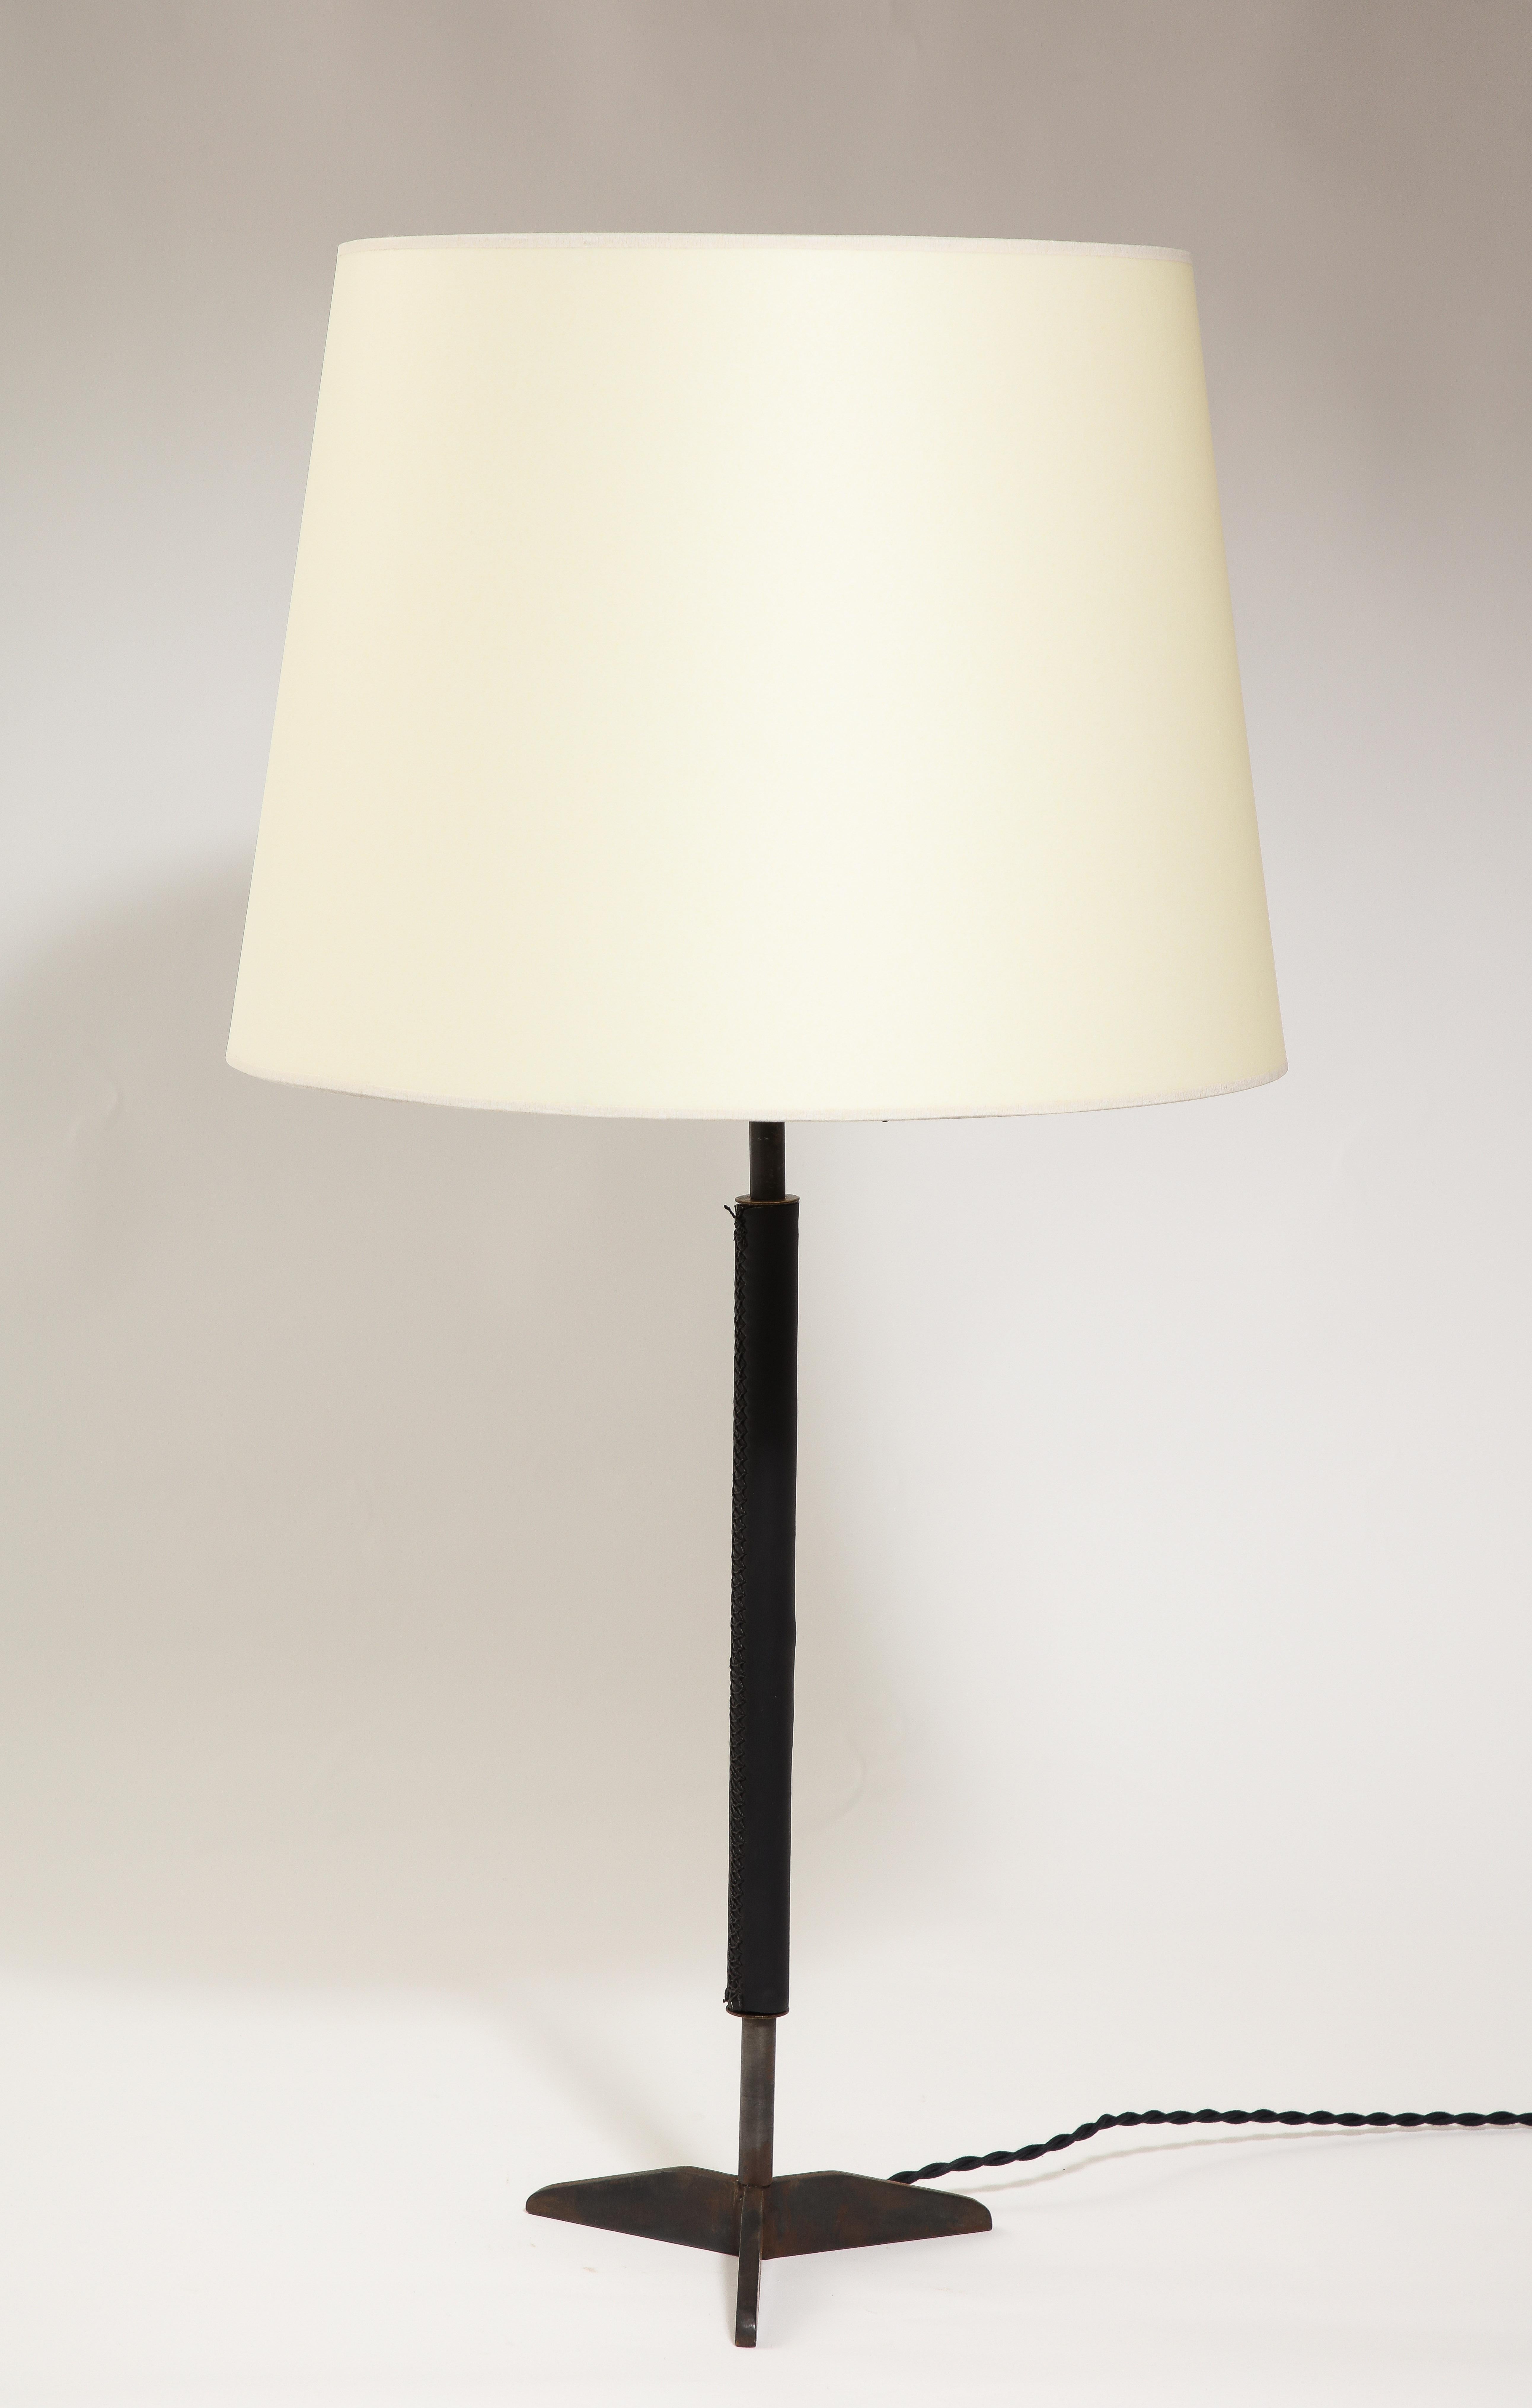 Blackened Steel & Leather Table Lamp, France 1950 For Sale 7